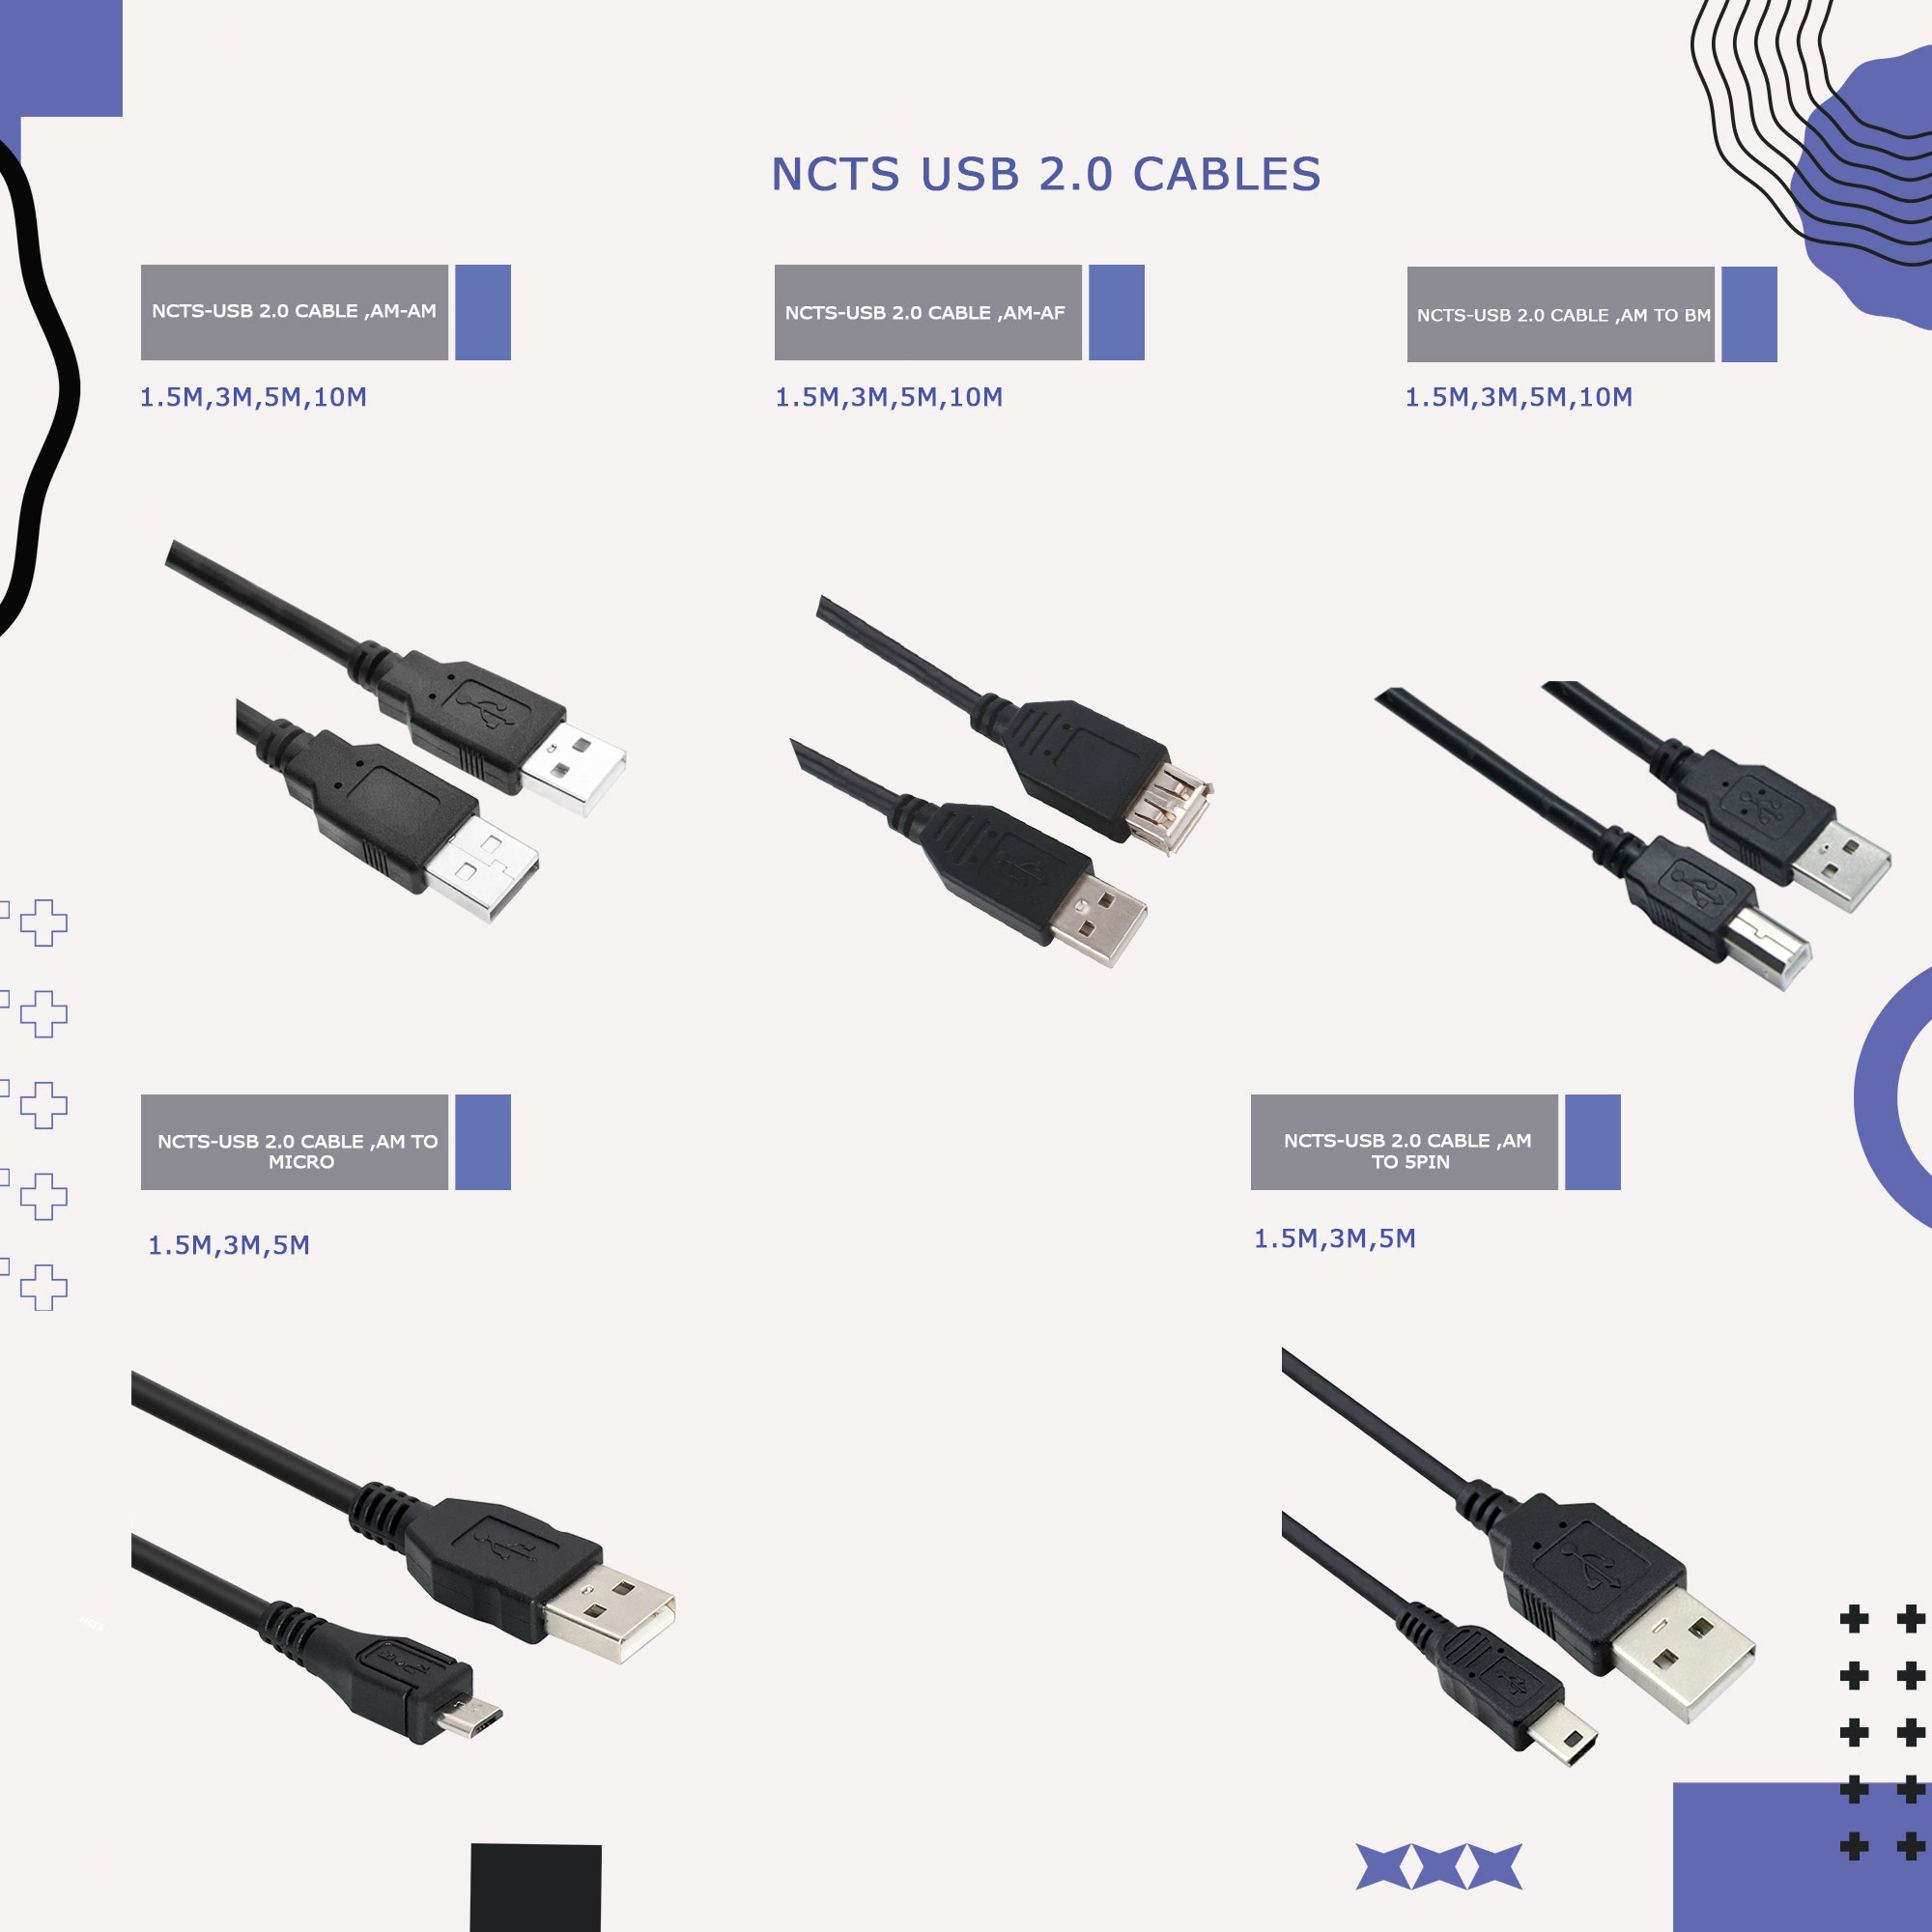 NCTS USB 2.0 CABLES